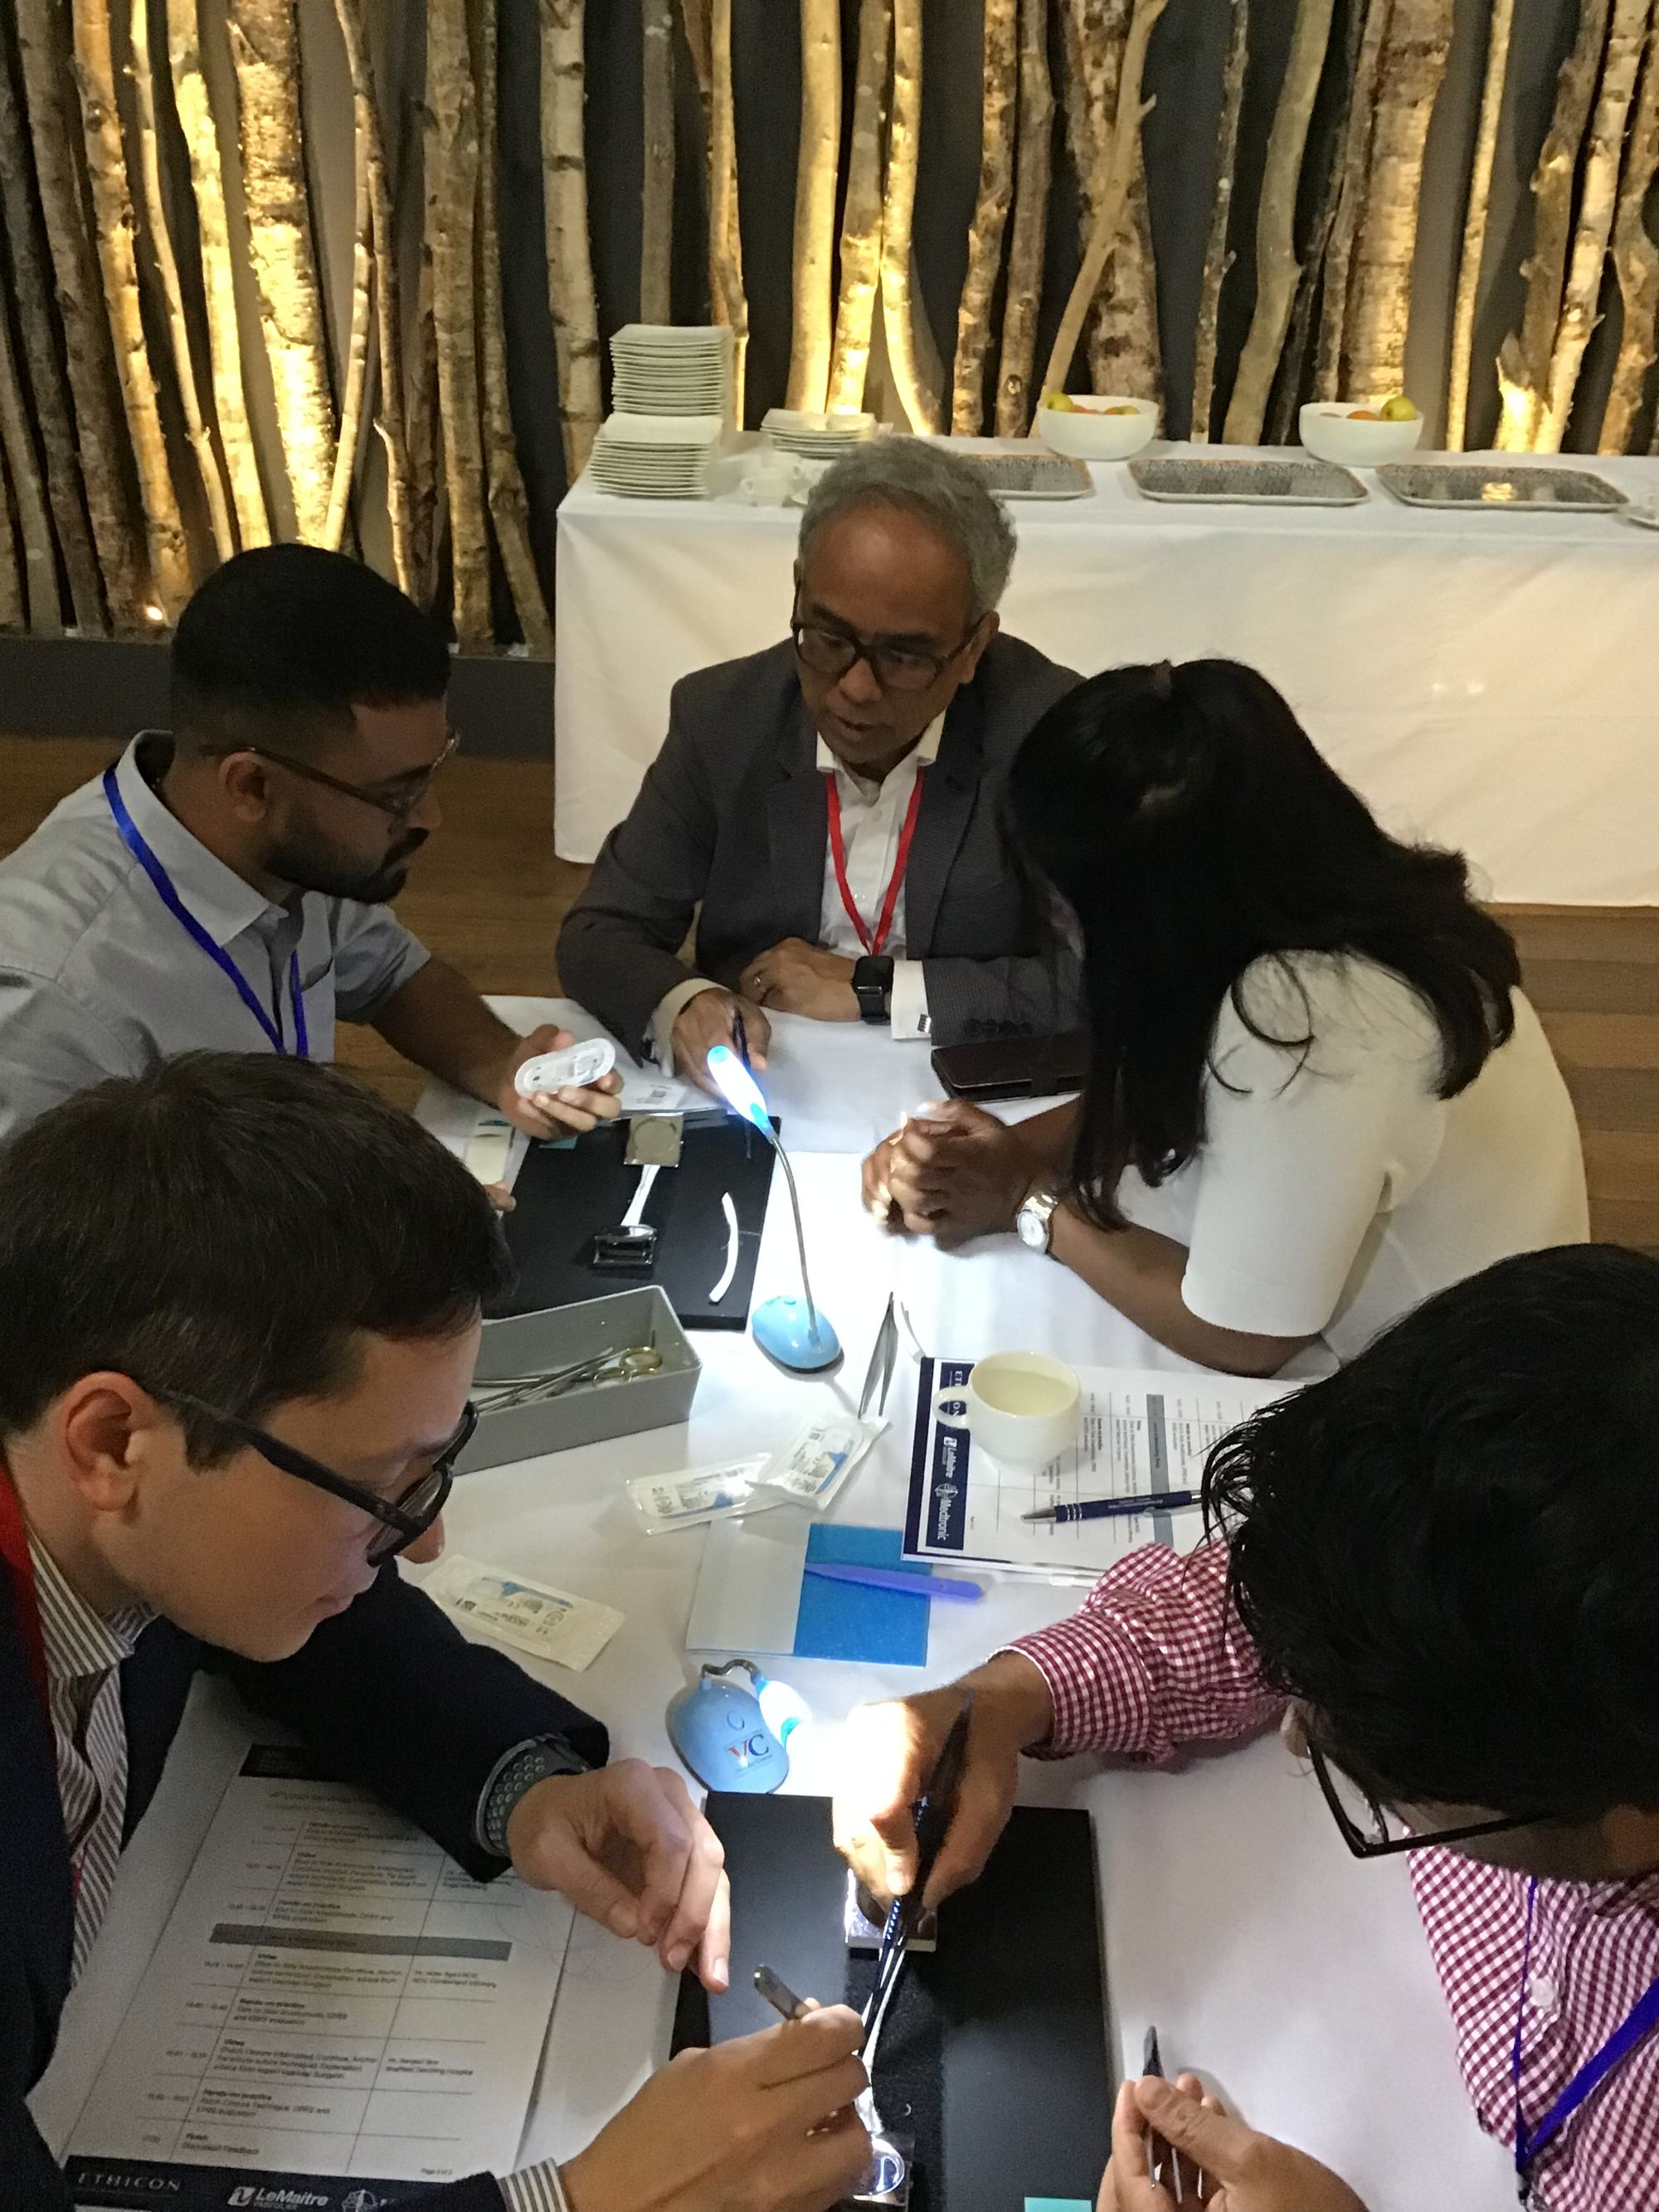 4th NCIC Vascular Anastomosis Workshop 24/05/2024 a course made for you. “The Royal College of Surgeons of England has awarded up to 6.5 CPD points” for the event.